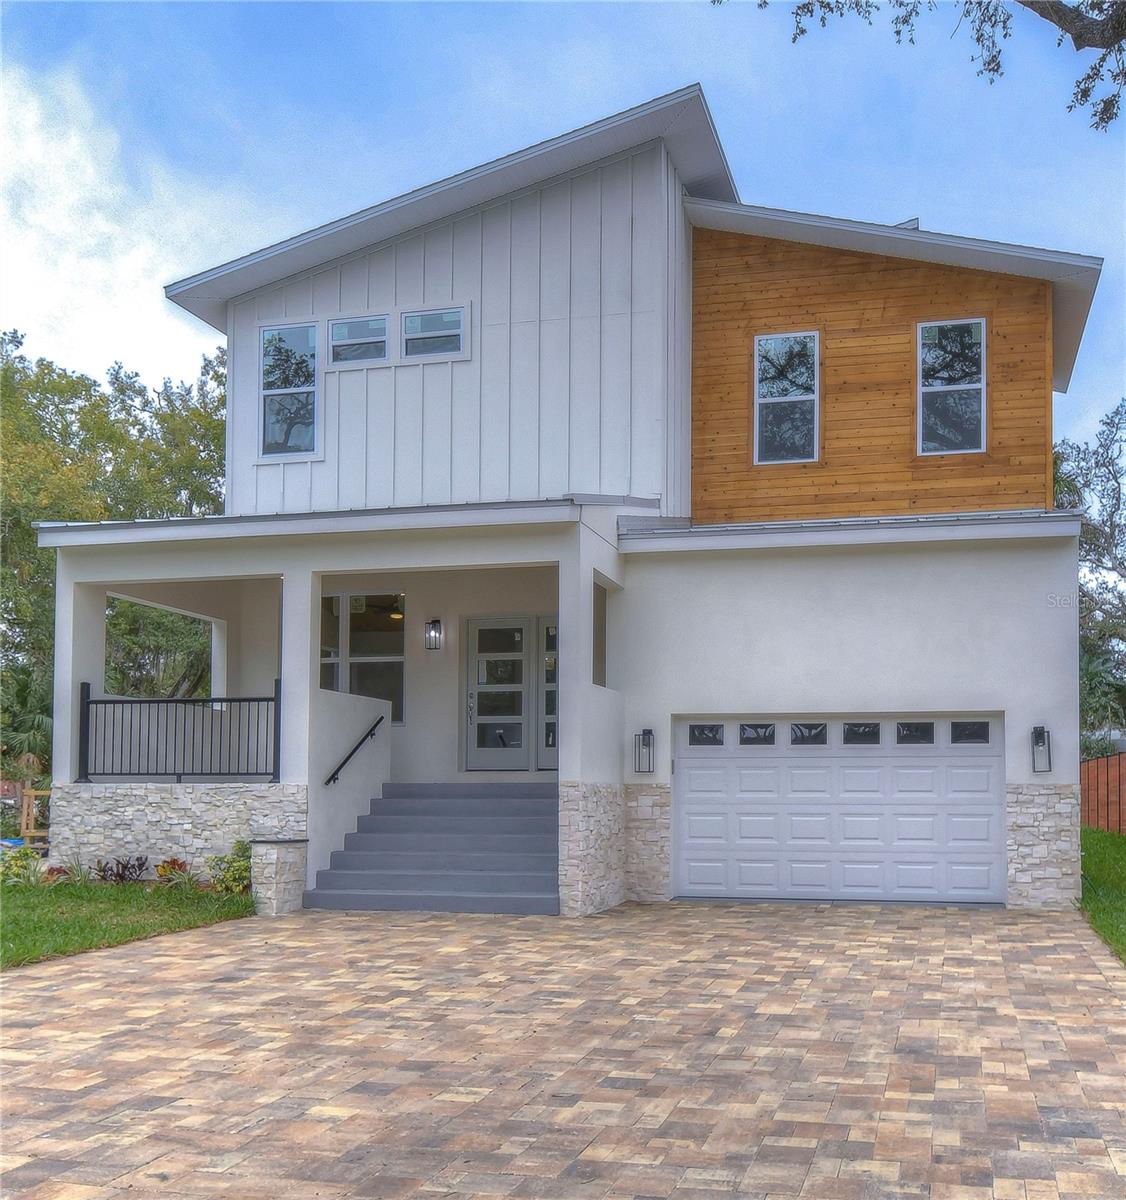 This Beautiful New Construction Contemporary Home is waiting for you!